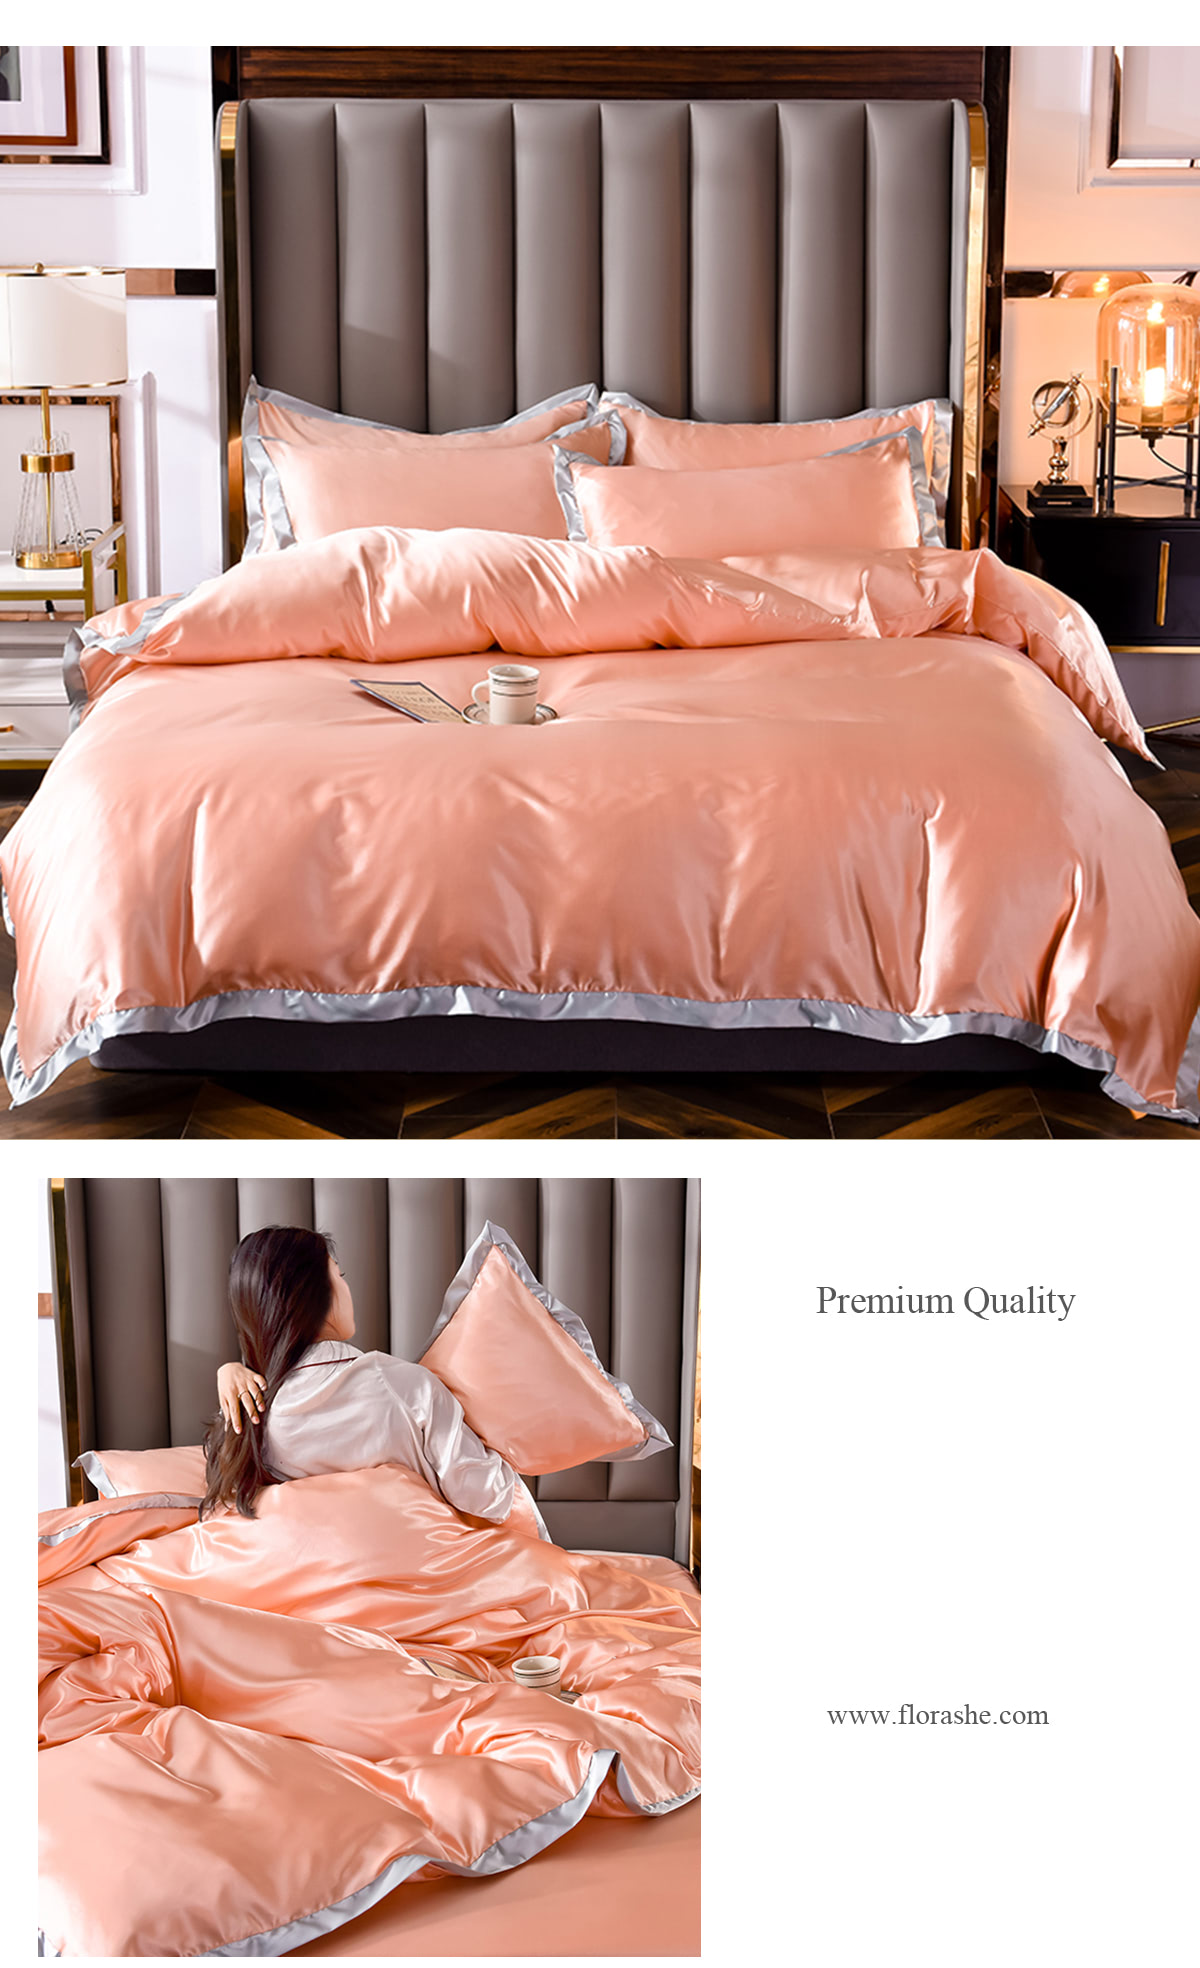 Fresh-and-Soft-Comfortable-Satin-Bed-Cover-Sheet-Set41.jpg